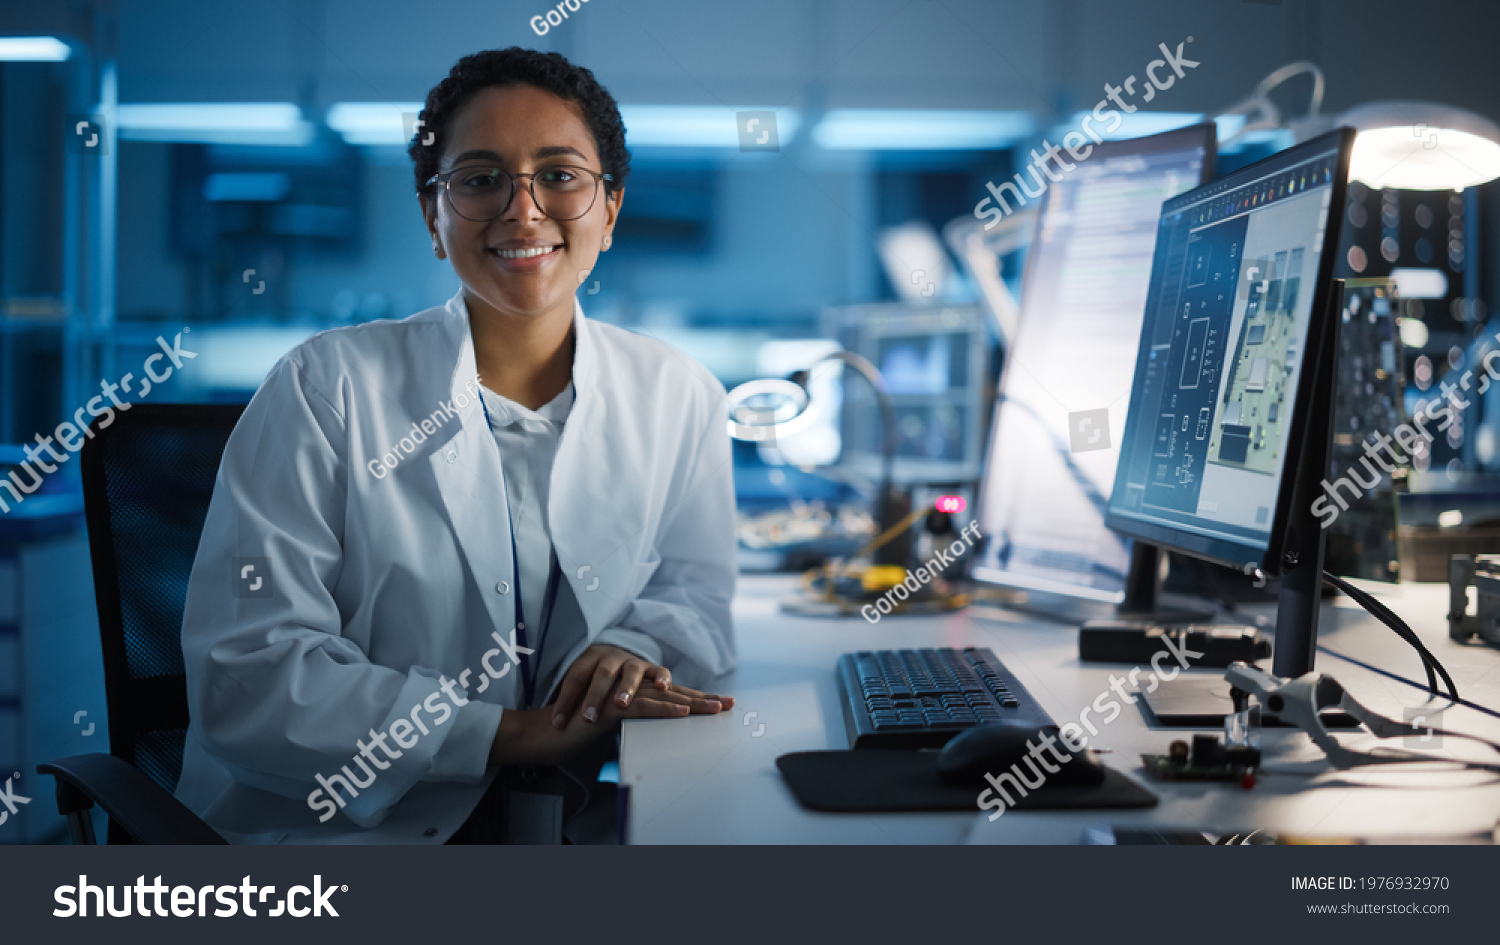 Beautiful Black Latin Woman Wearing Glasses Smiling Charmingly Looking at Camera. Young Intelligent Female Scientist Working in Laboratory. Technological Laboratory in Bokeh Blue as Background #1976932970